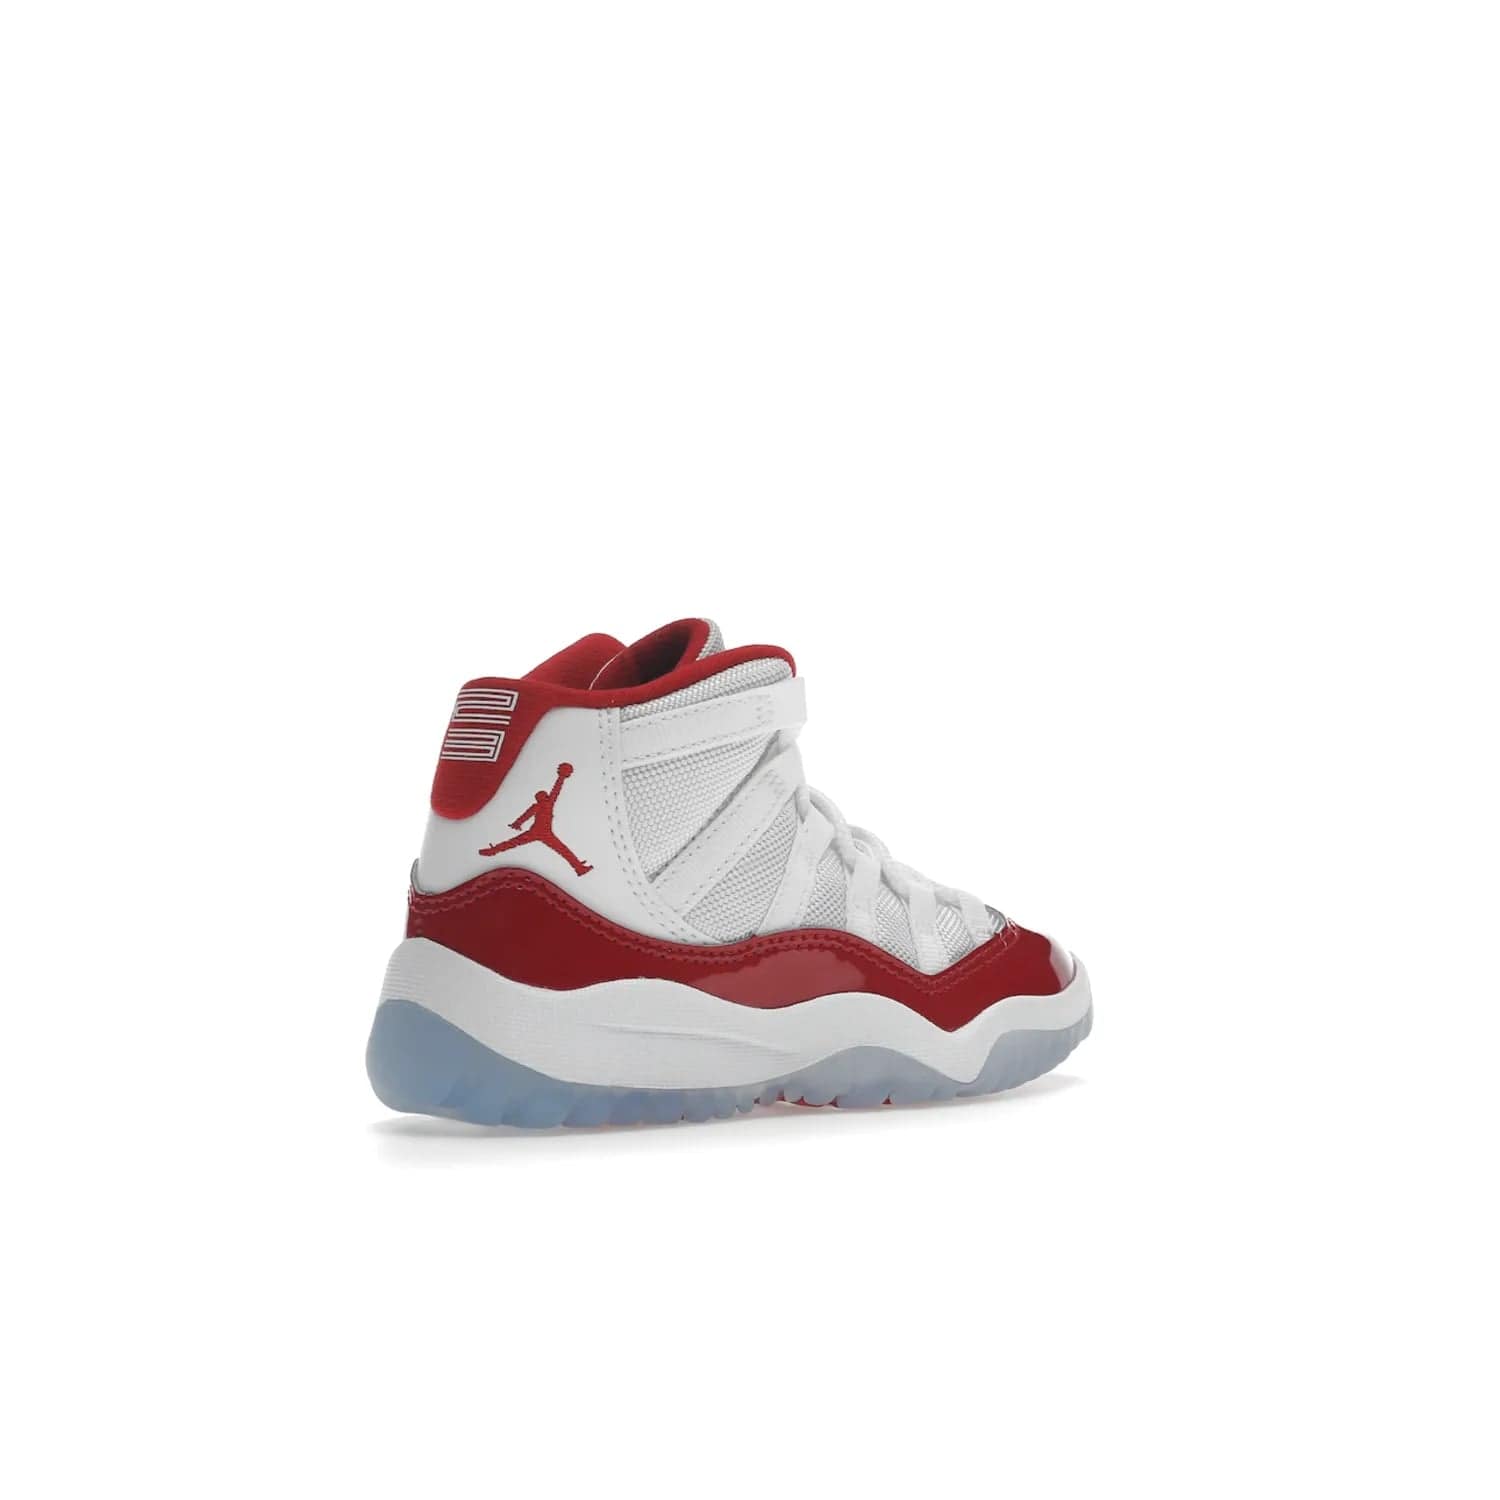 Jordan 11 Retro Cherry (2022) (PS) - Image 33 - Only at www.BallersClubKickz.com - An iconic silhouette with a timeless look, the Air Jordan 11 Retro Cherry 2022 PS features a crisp White, Varsity Red and Black colorway. The upper is made of ballistic mesh, a red patent leather mudguard, '23' branding and white Phylon midsole. Get optimal cushioning and comfort on December 10th, 2022. Don't miss out.